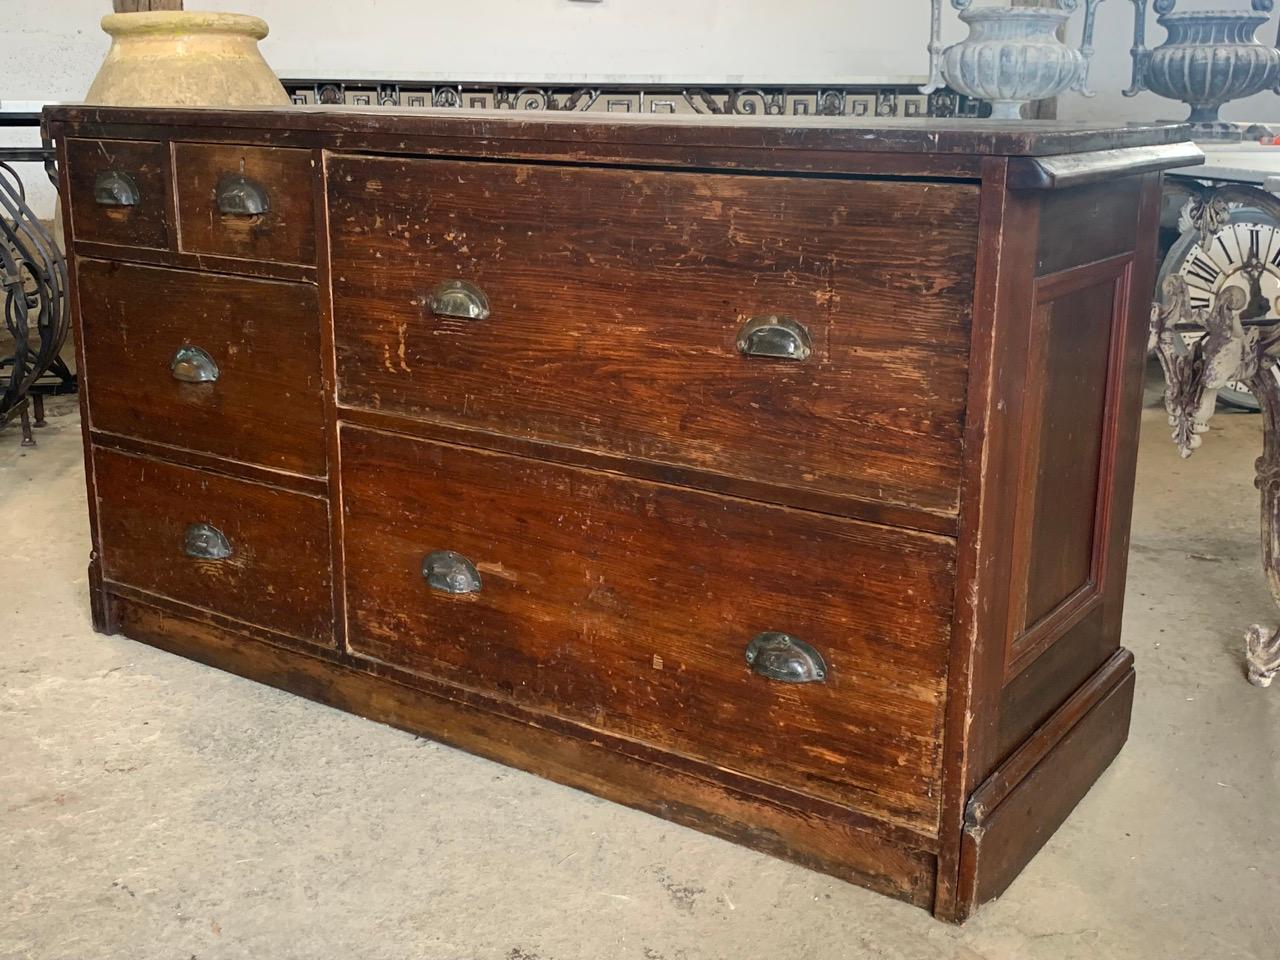 Hand-Crafted Early 20th Century Haberdashery Shop Counter